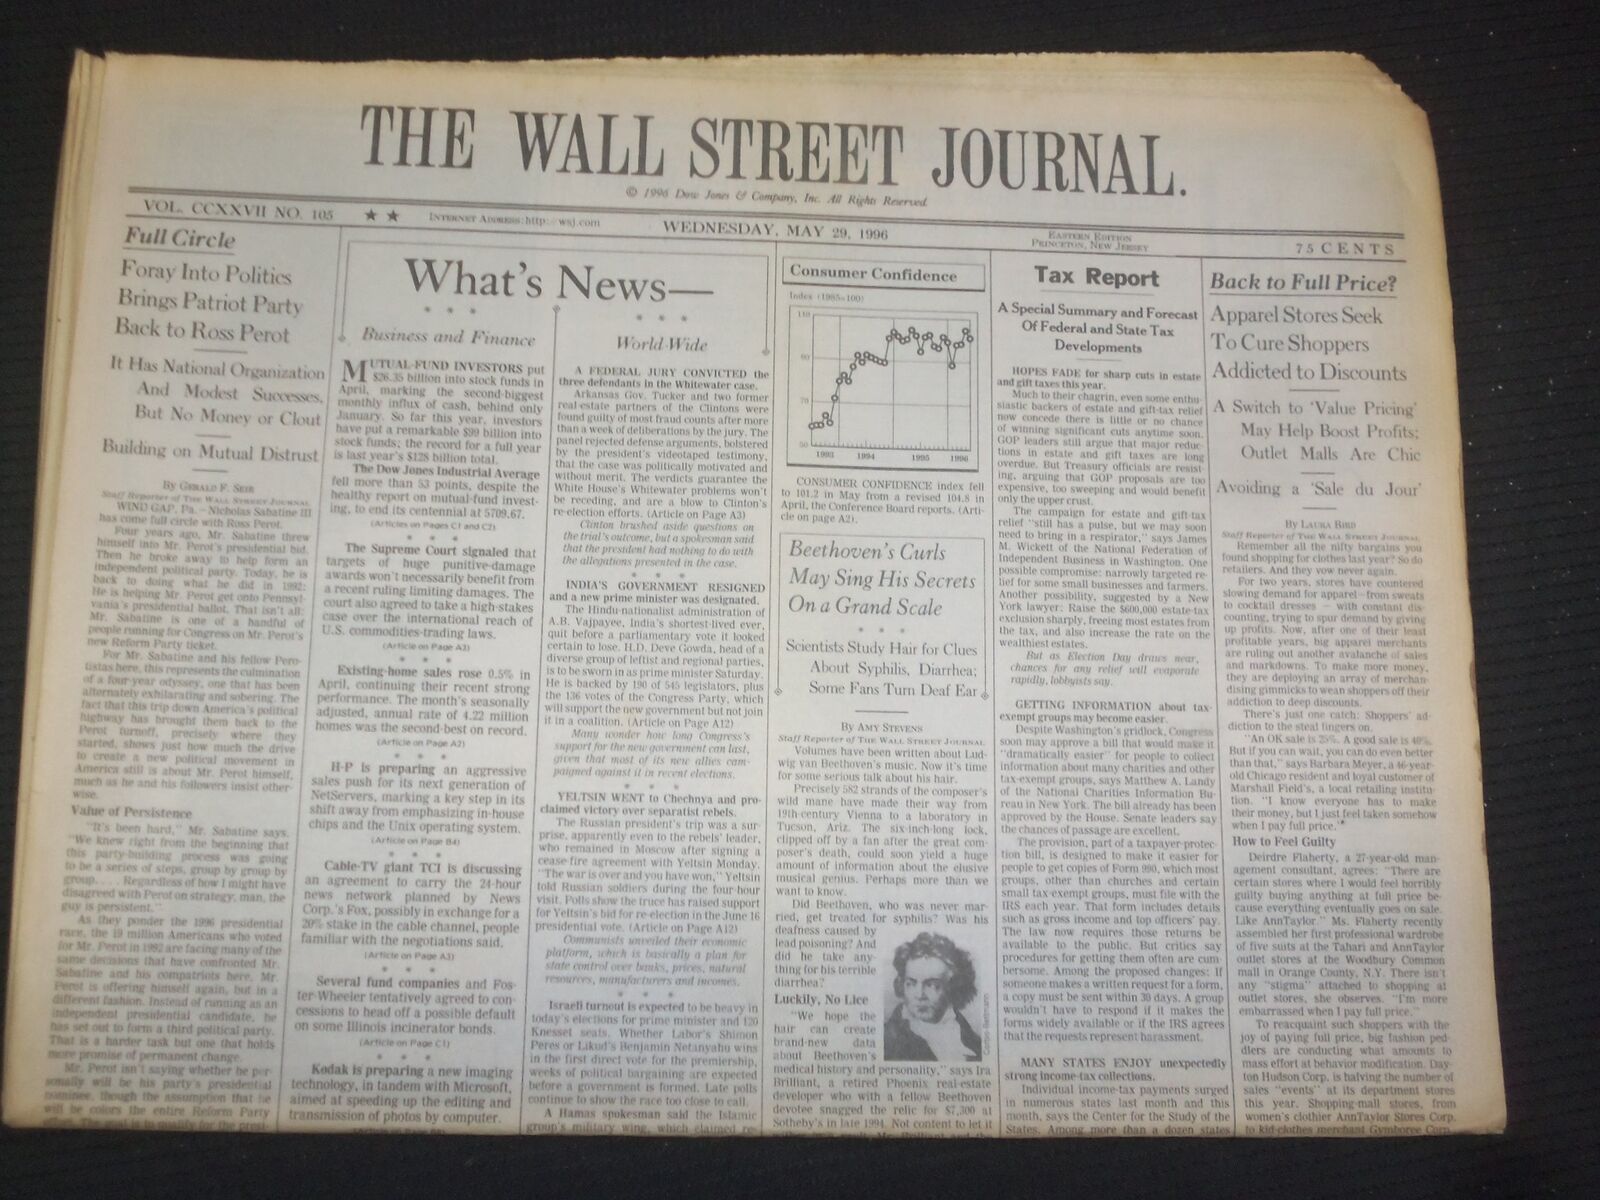 1996 MAY 29 THE WALL STREET JOURNAL-APPAREL STORES SEEK TO CURE SHOPPERS- WJ 285